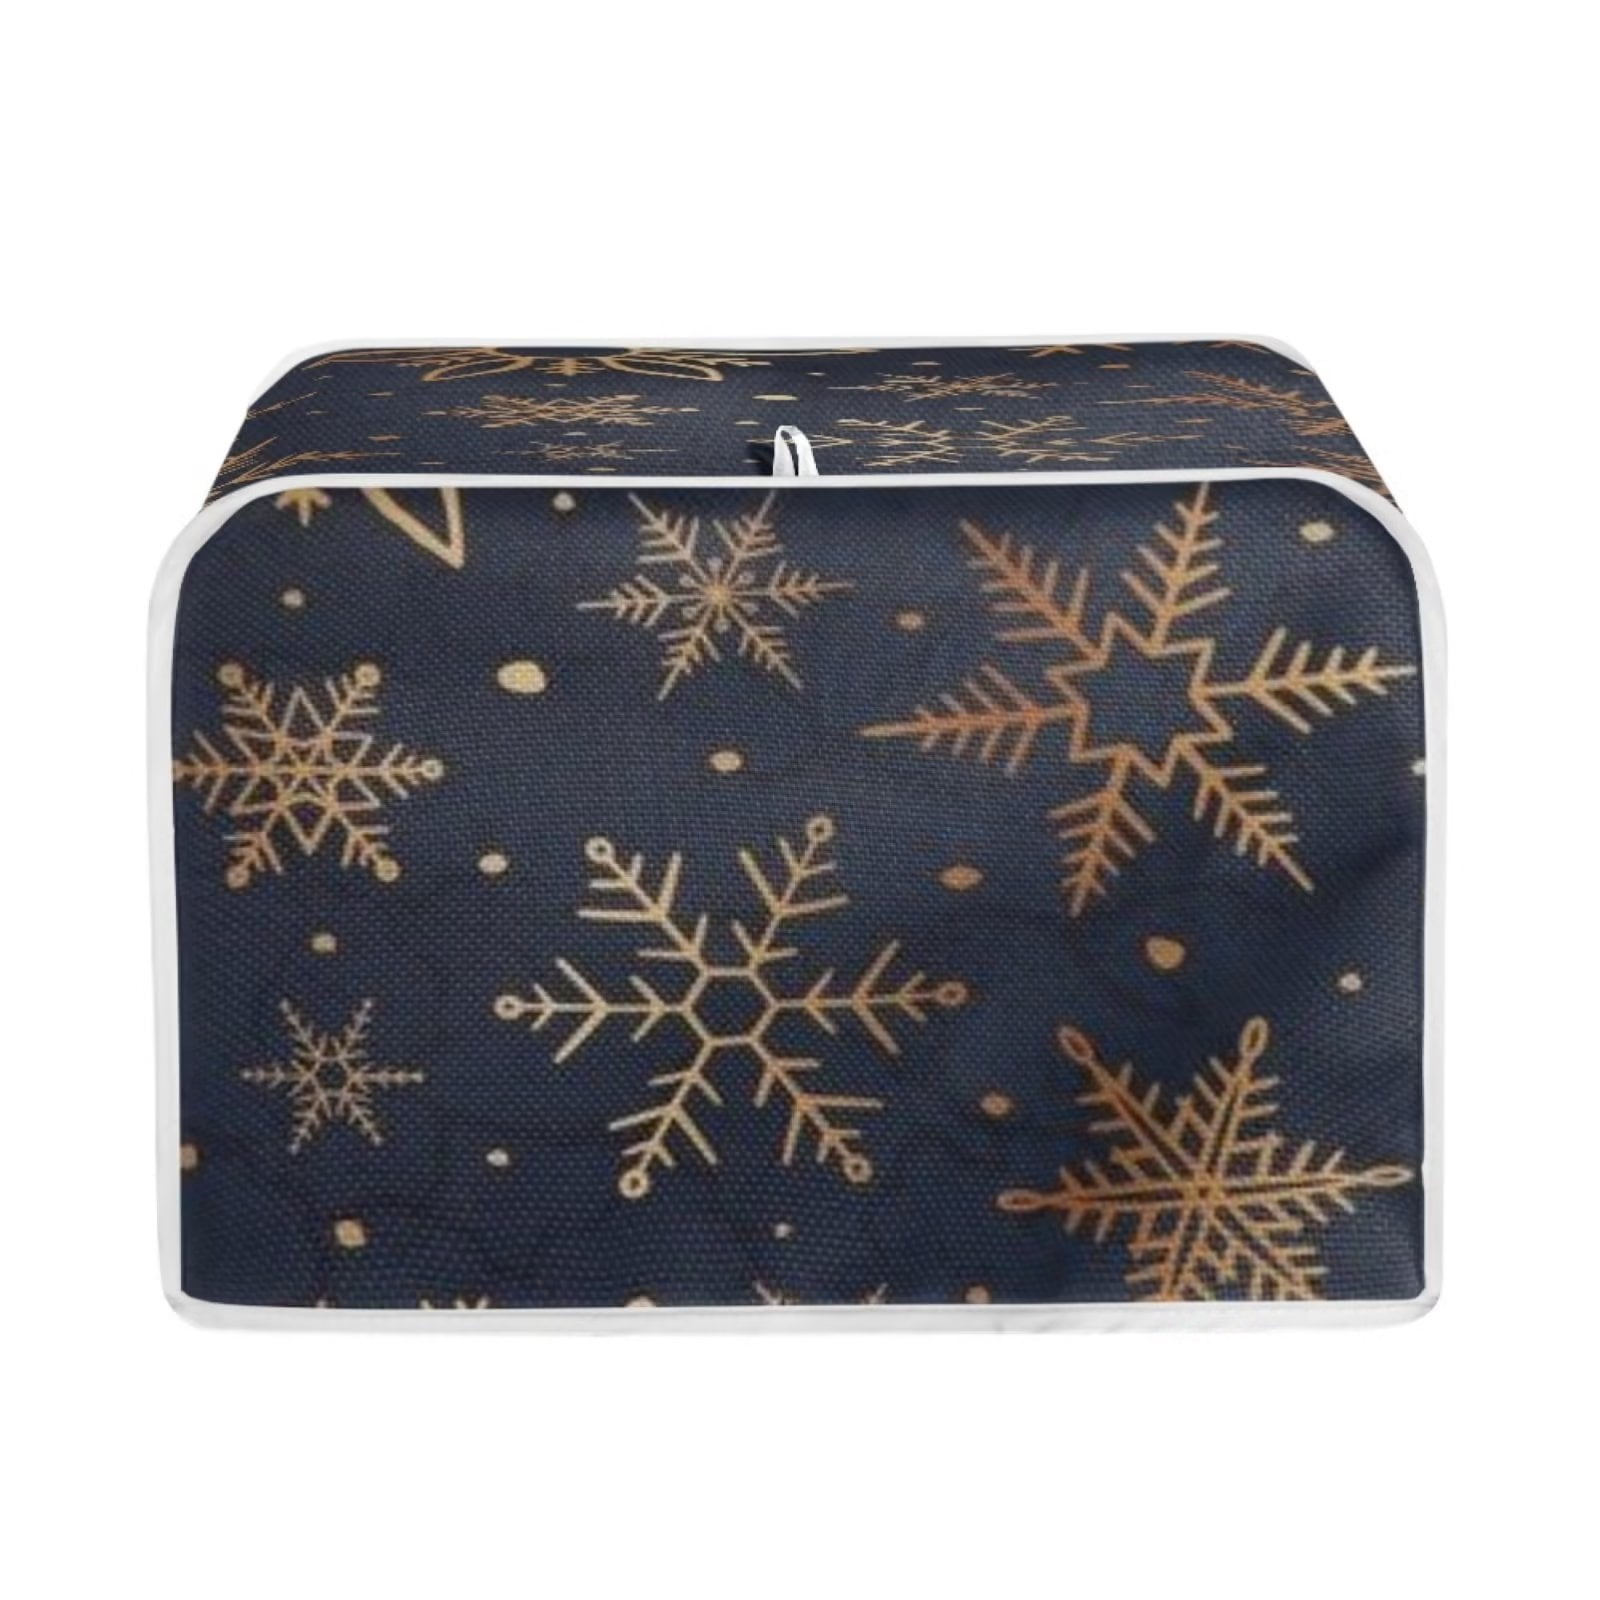 Renewold Christmas Trees Toaster Cover 2 Slice and Blender Cover Set  Snowflake Dust Cover Wide Slot Bread Maker Cover Kitchen Small Appliance  Covers Stand Mixer Coffee Maker Cover 